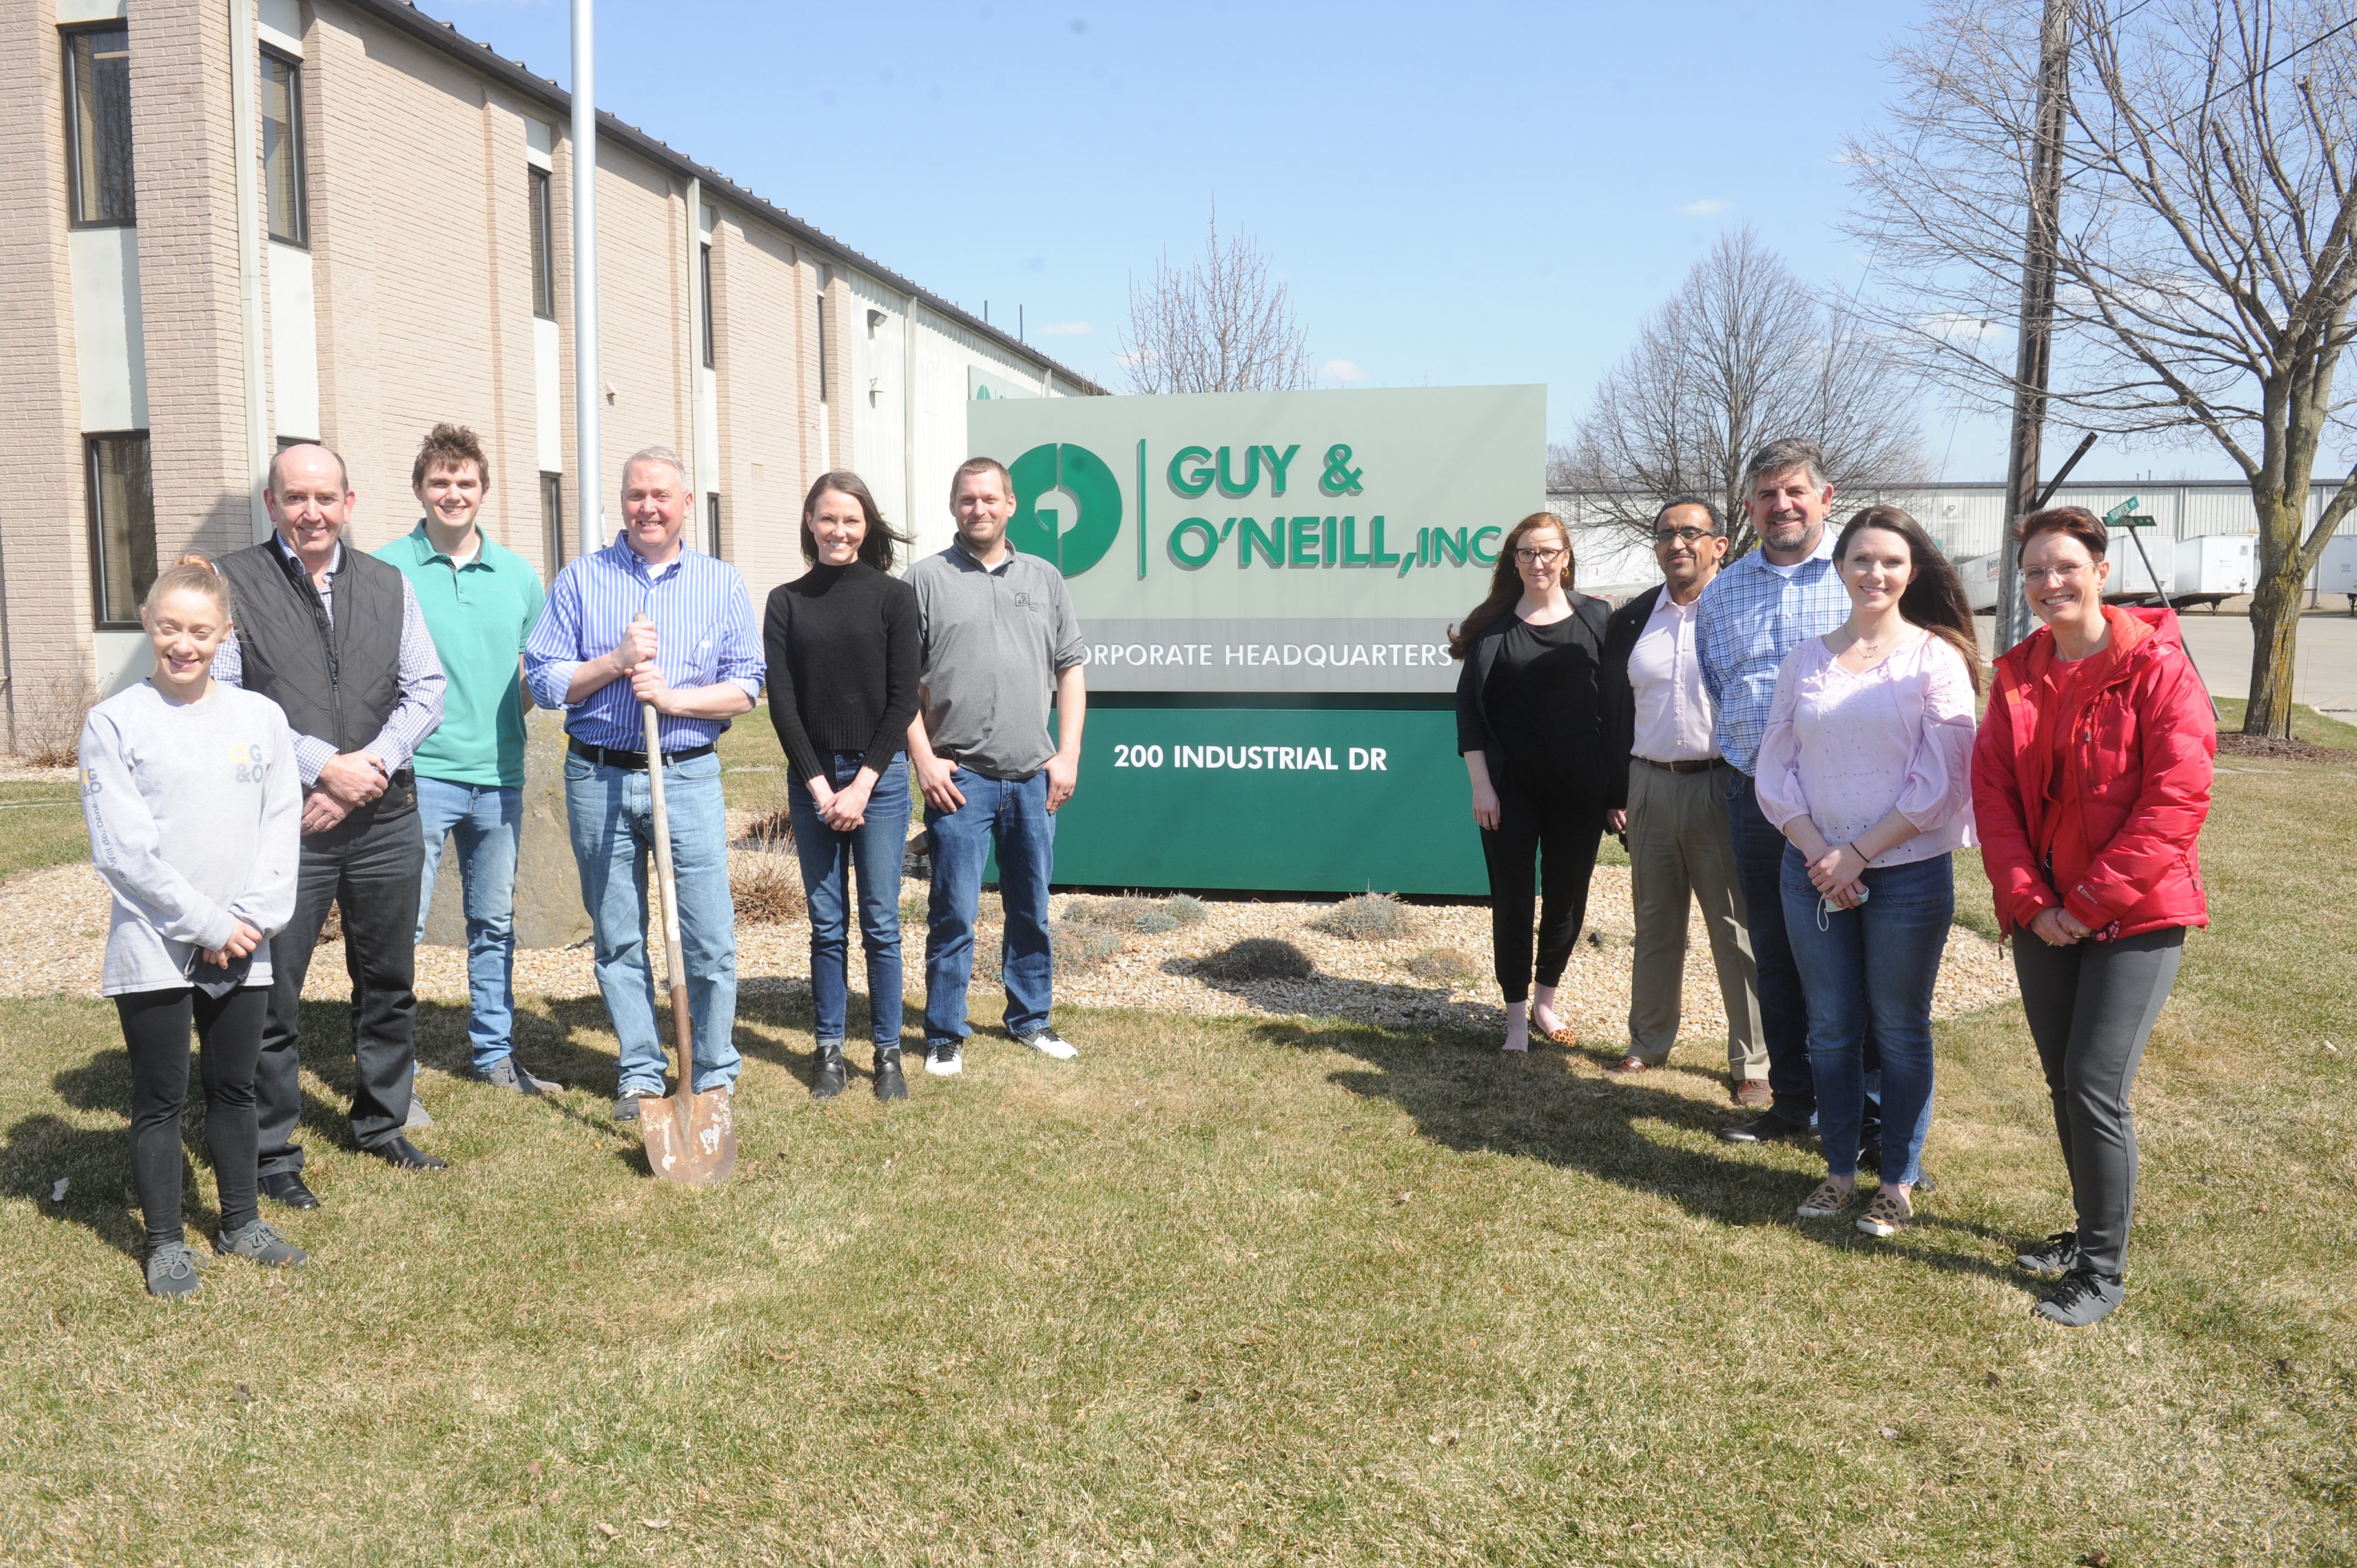 Proud Guy & O'Neill employees standing at 200 Industrial Drive, Fredonia, WI